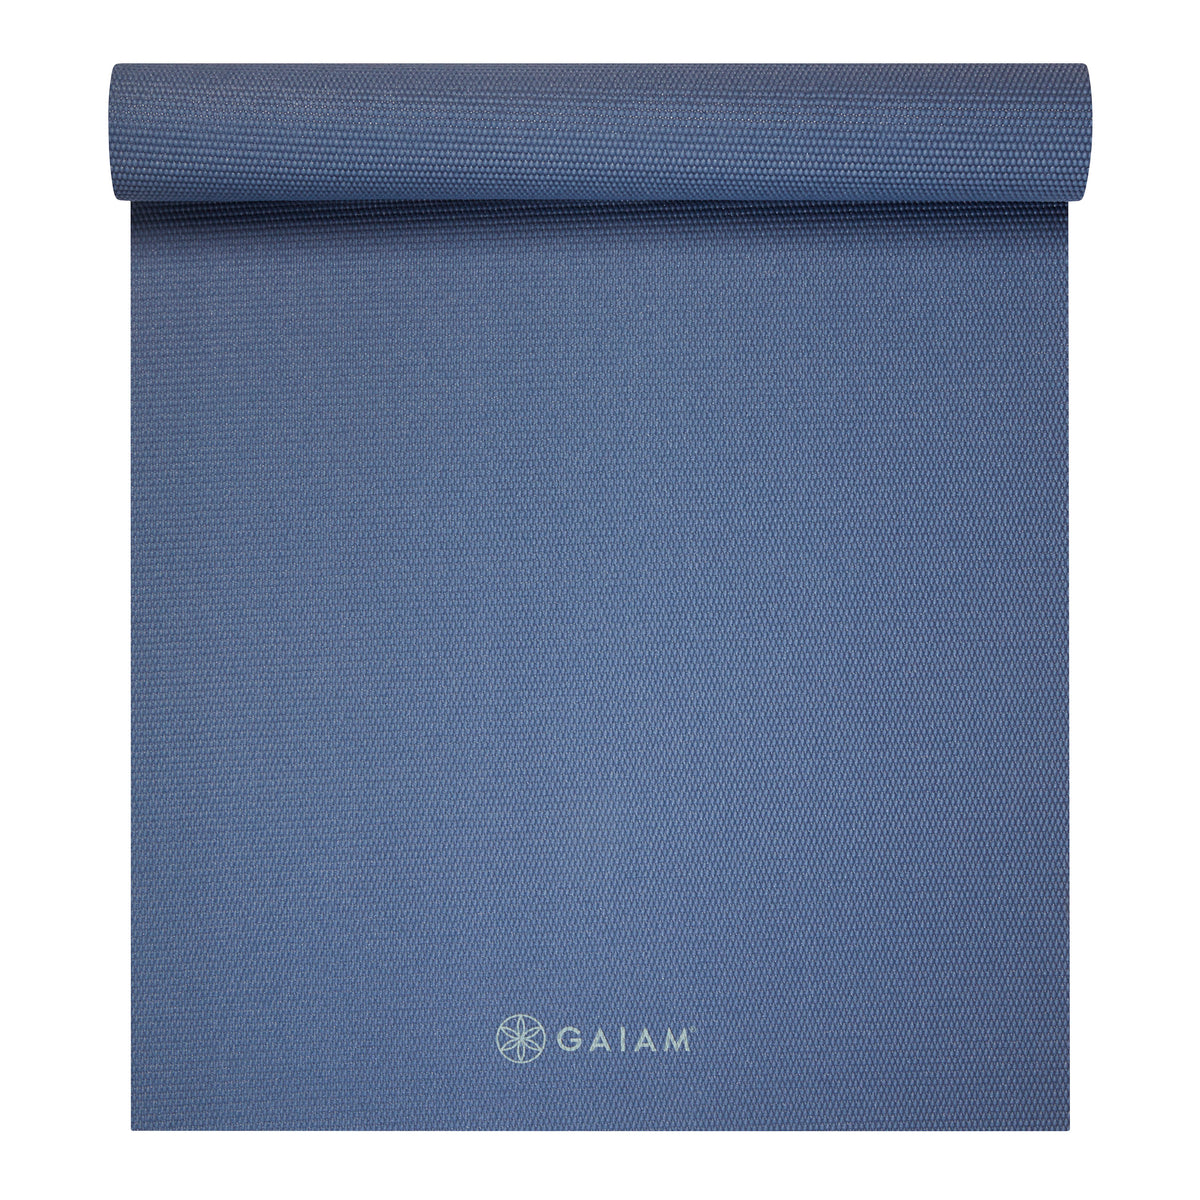 Gaiam Classic Solid Color Yoga Mats (5mm) High Tide top rolled